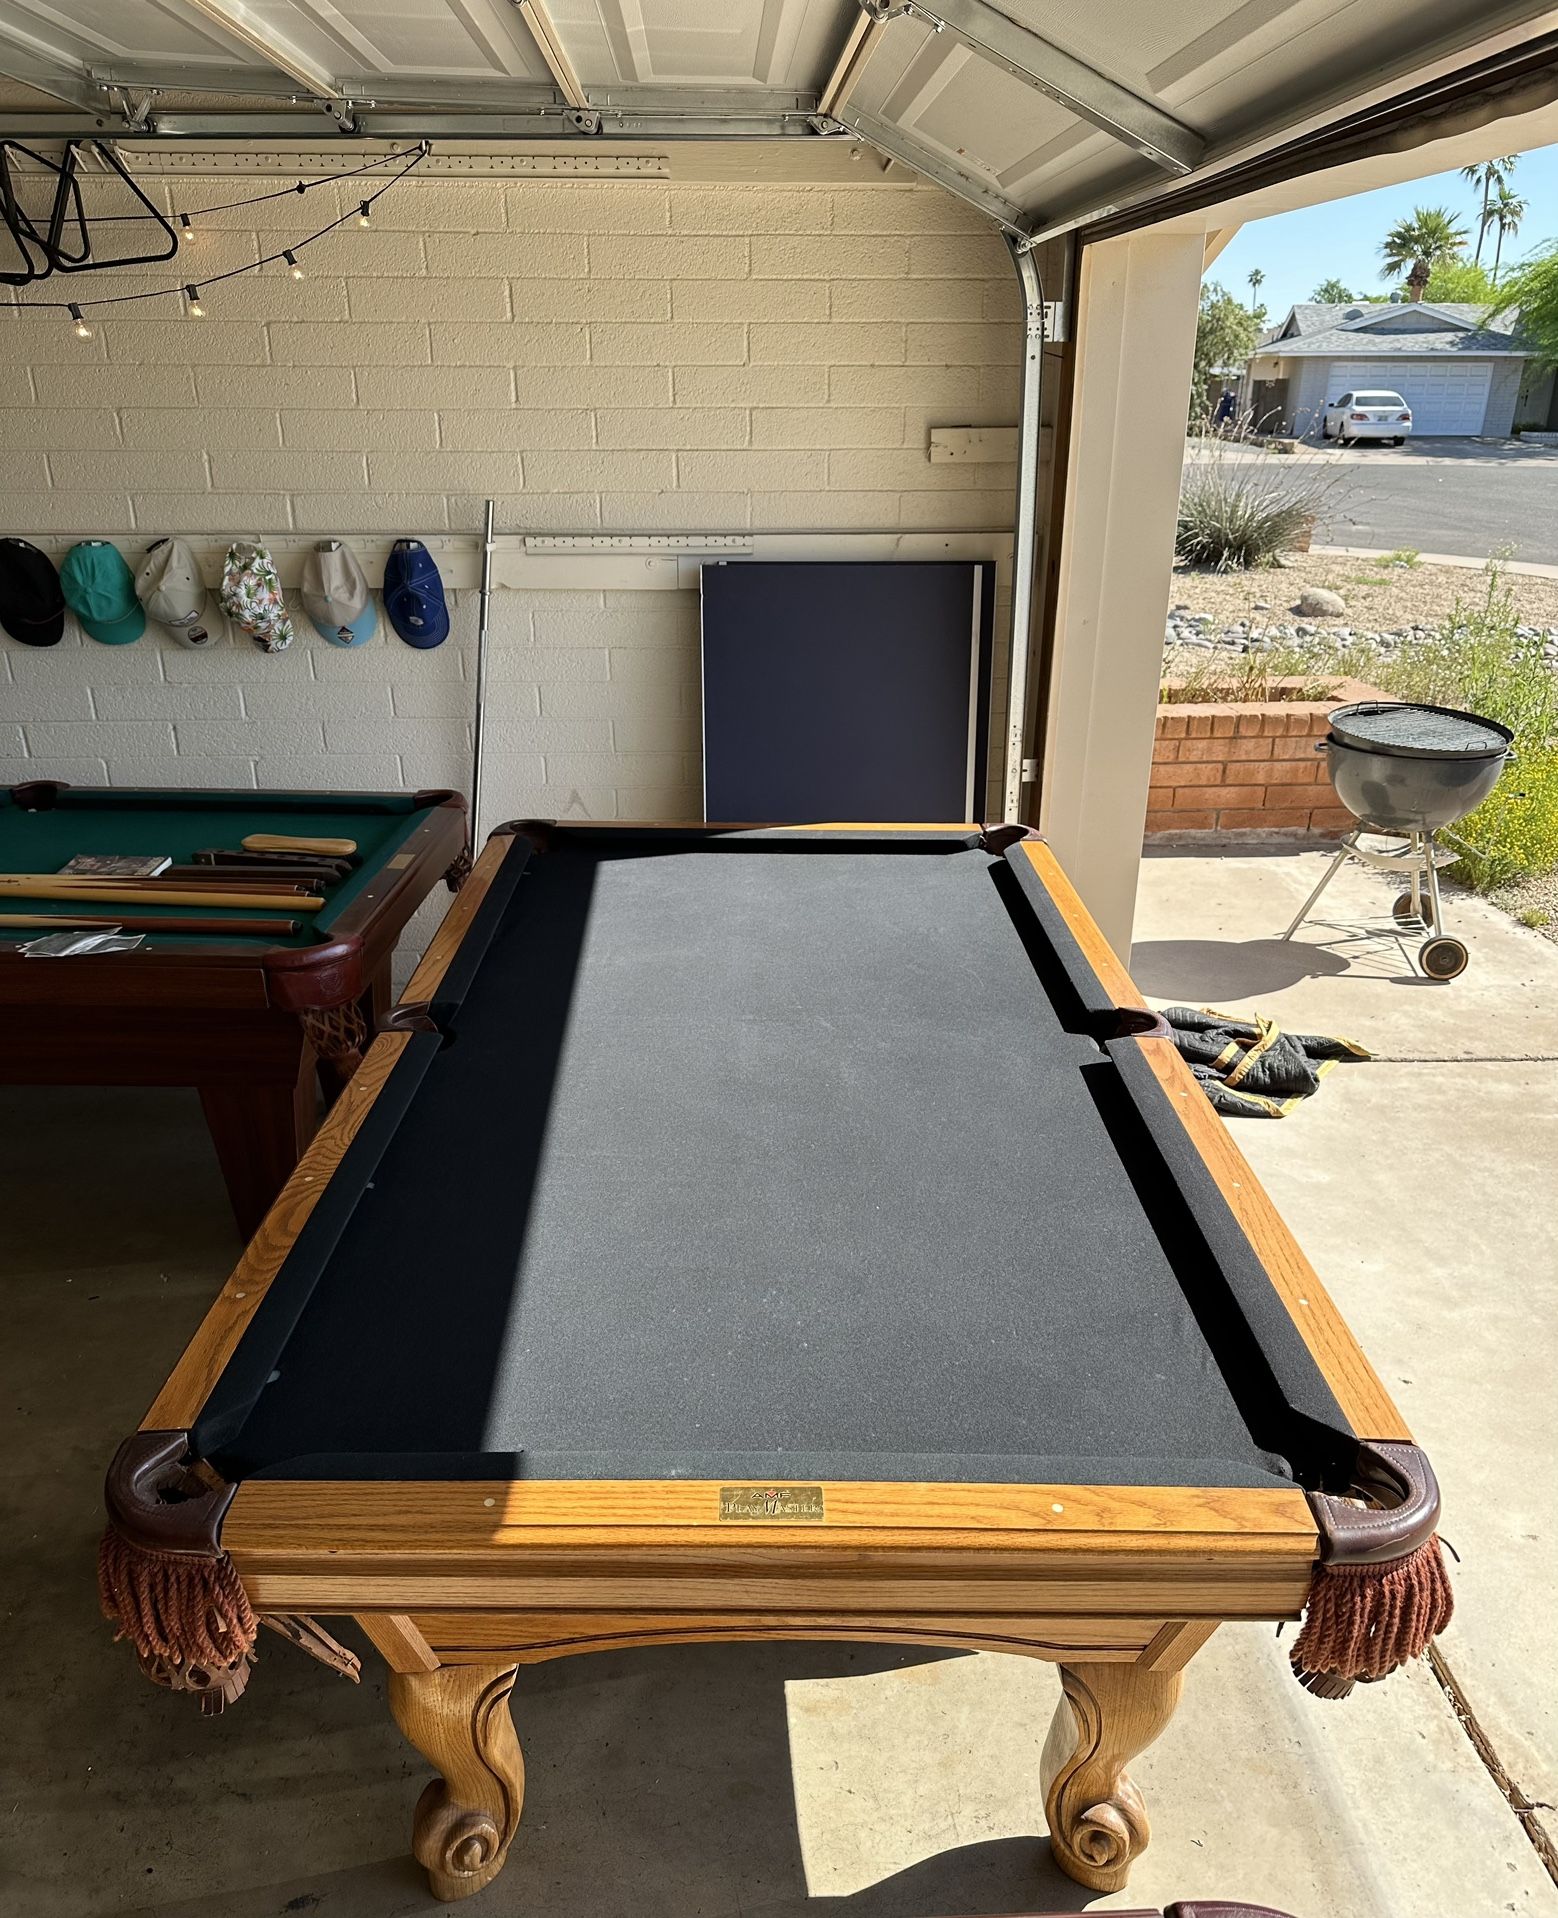 8’ AMF Playmaster Pool Table - DELIVERY AVAILABLE